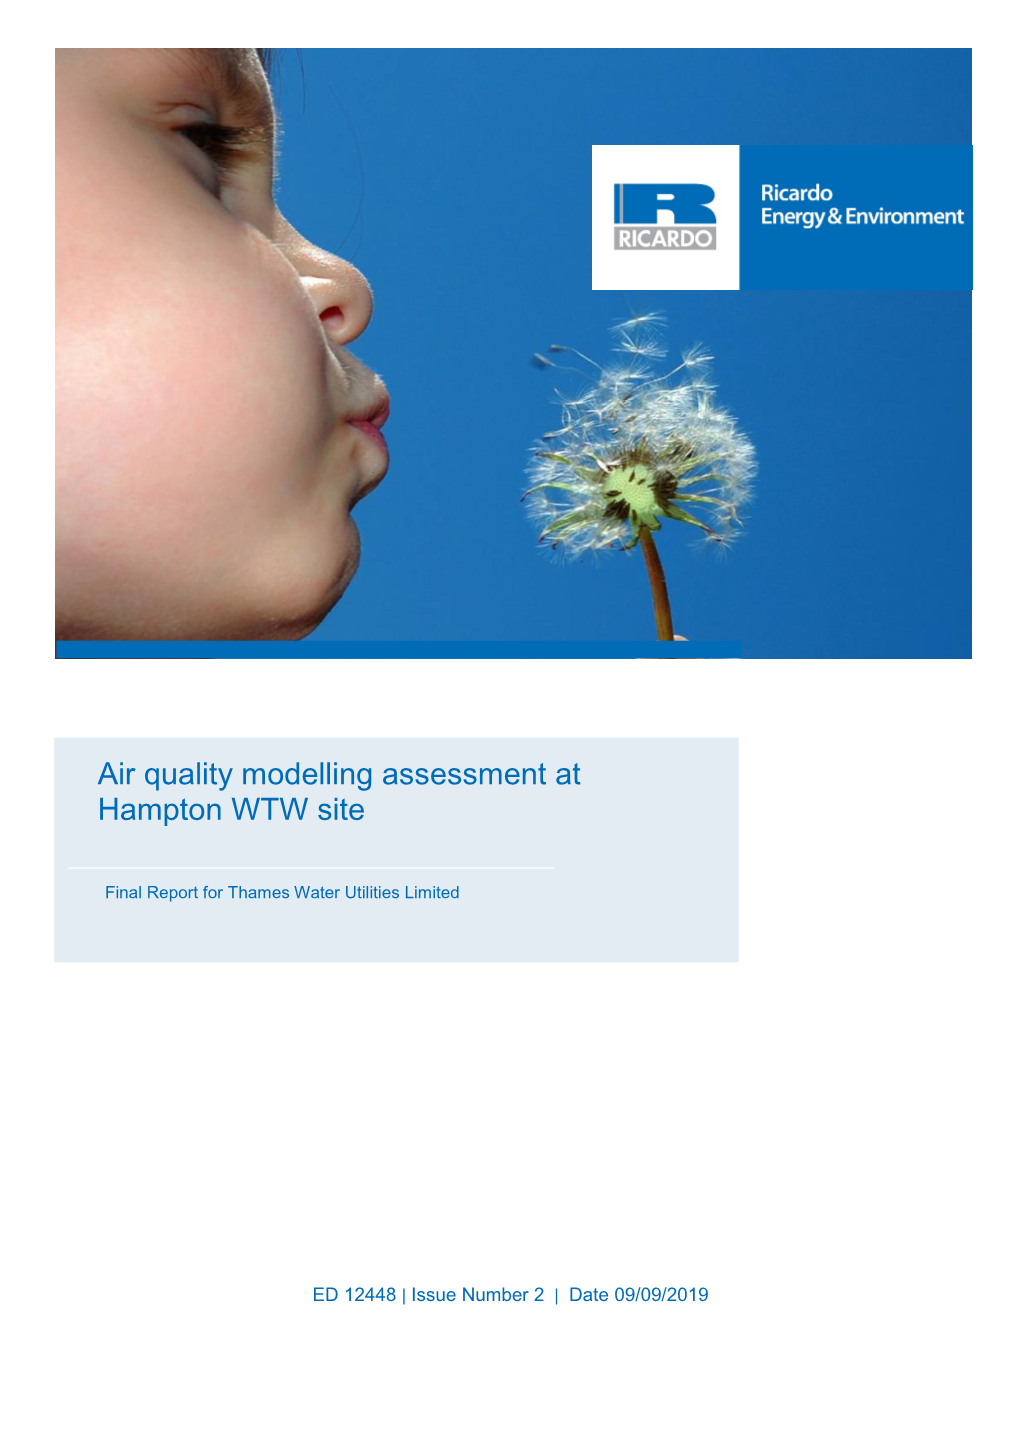 Air Quality Modelling Assessment at Hampton WTW Site